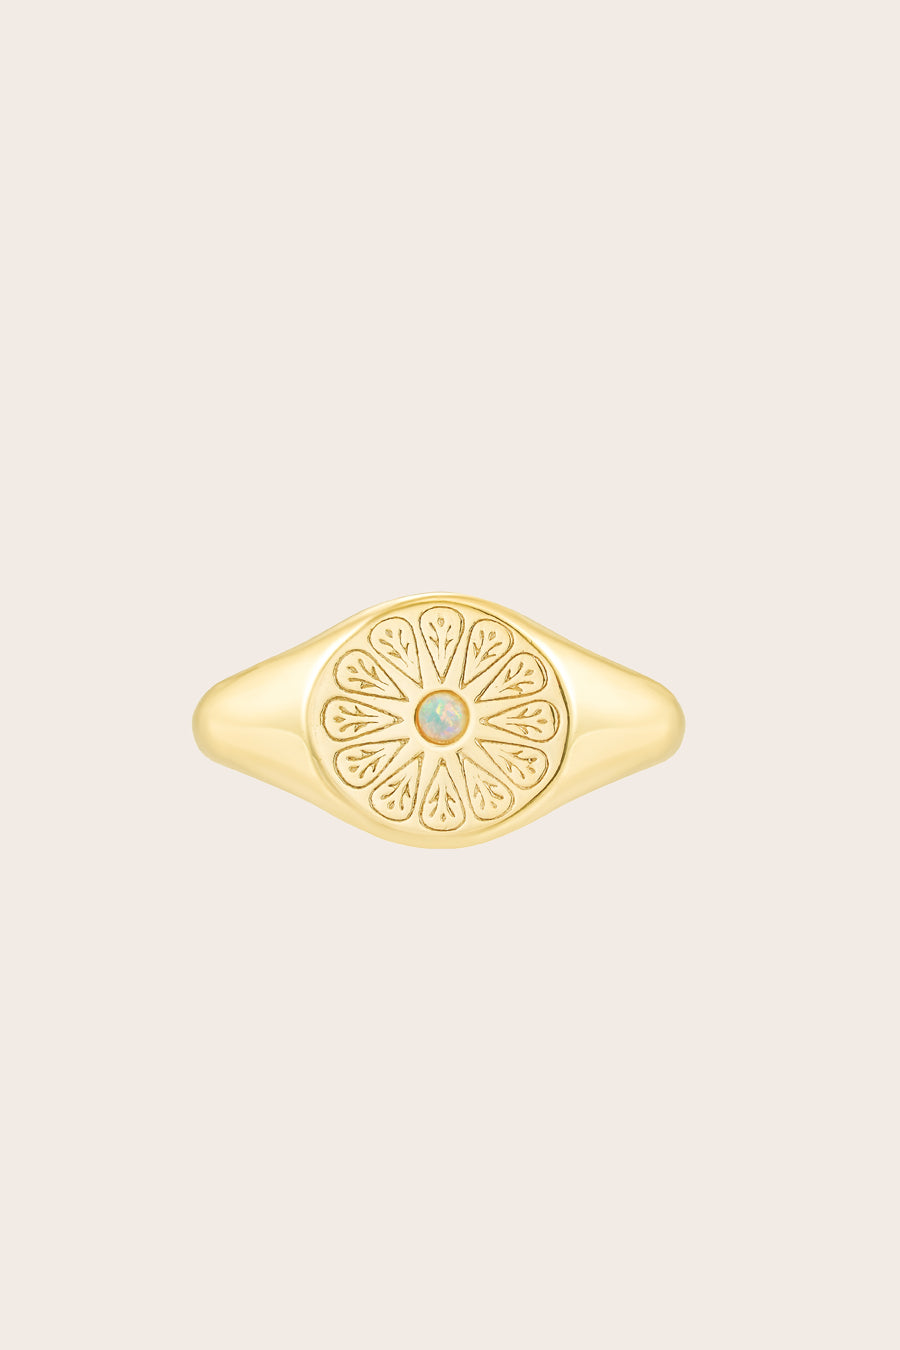 Gold October Opal Signet Birthstone Ring on cream background